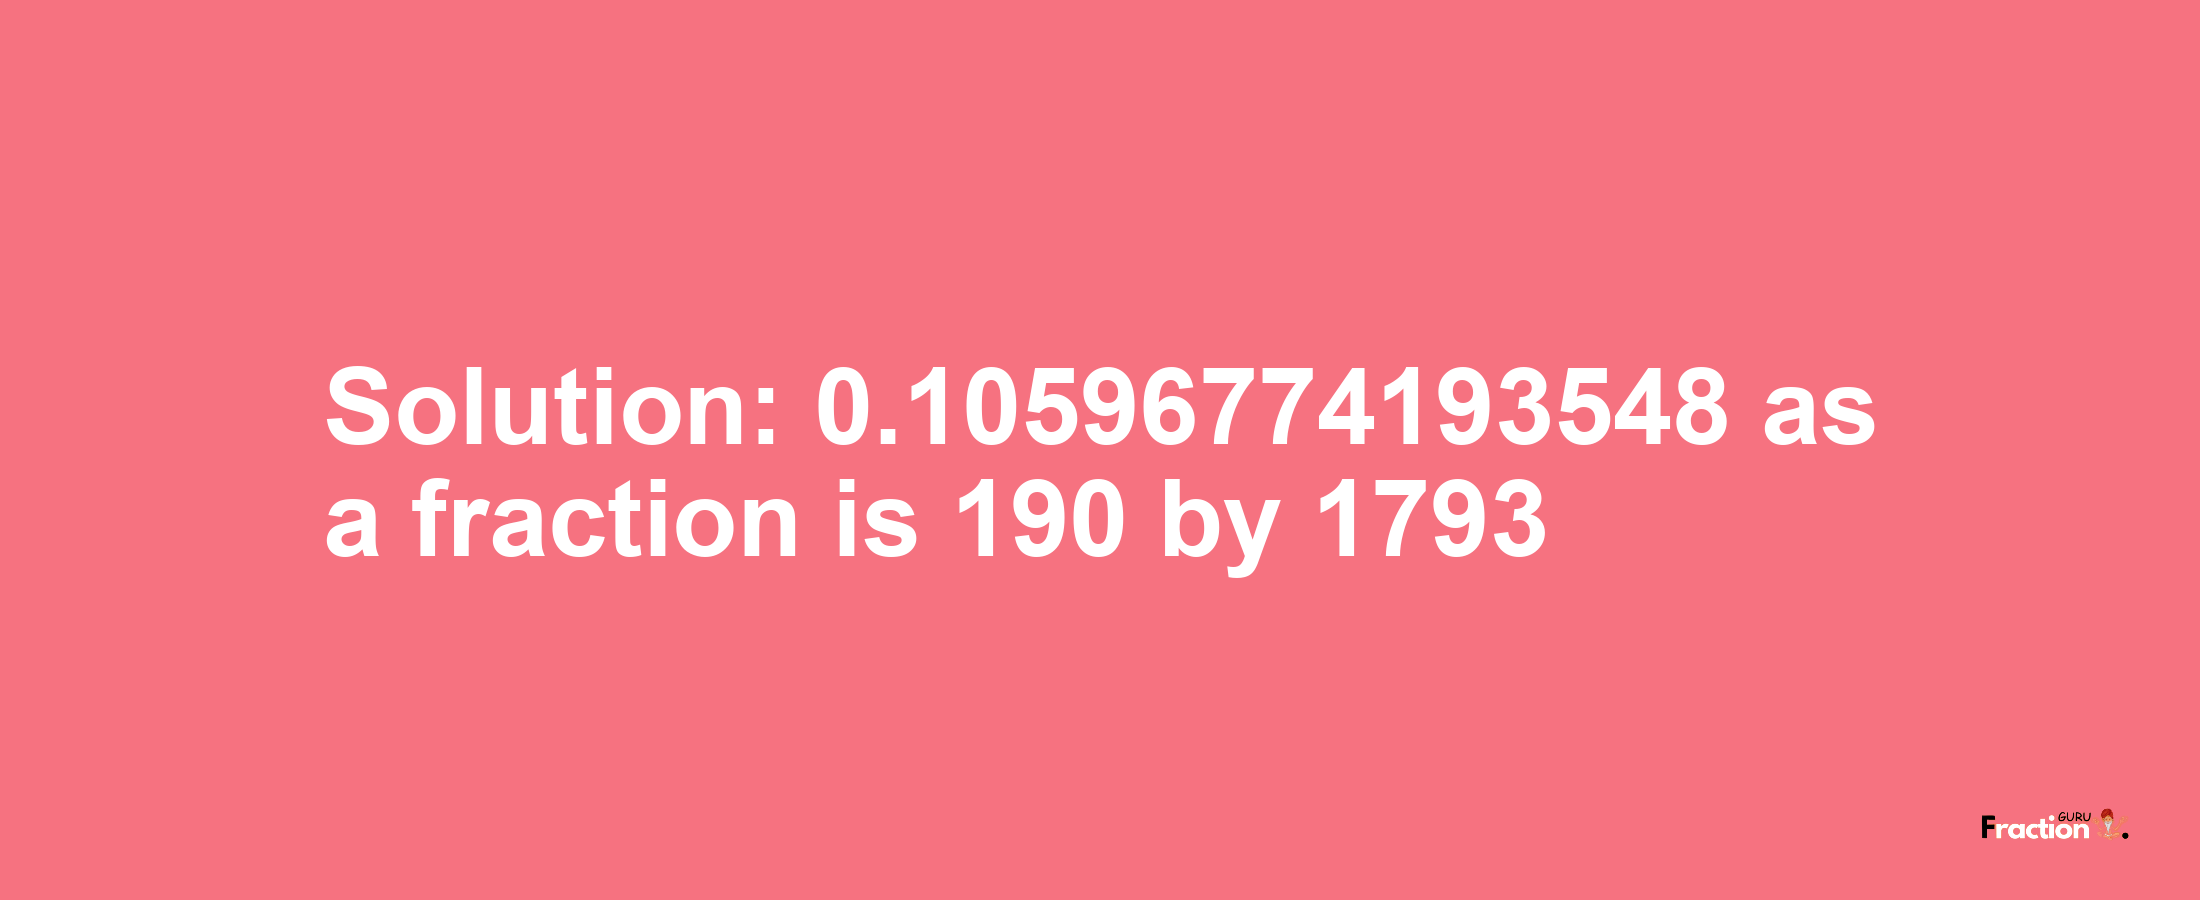 Solution:0.10596774193548 as a fraction is 190/1793